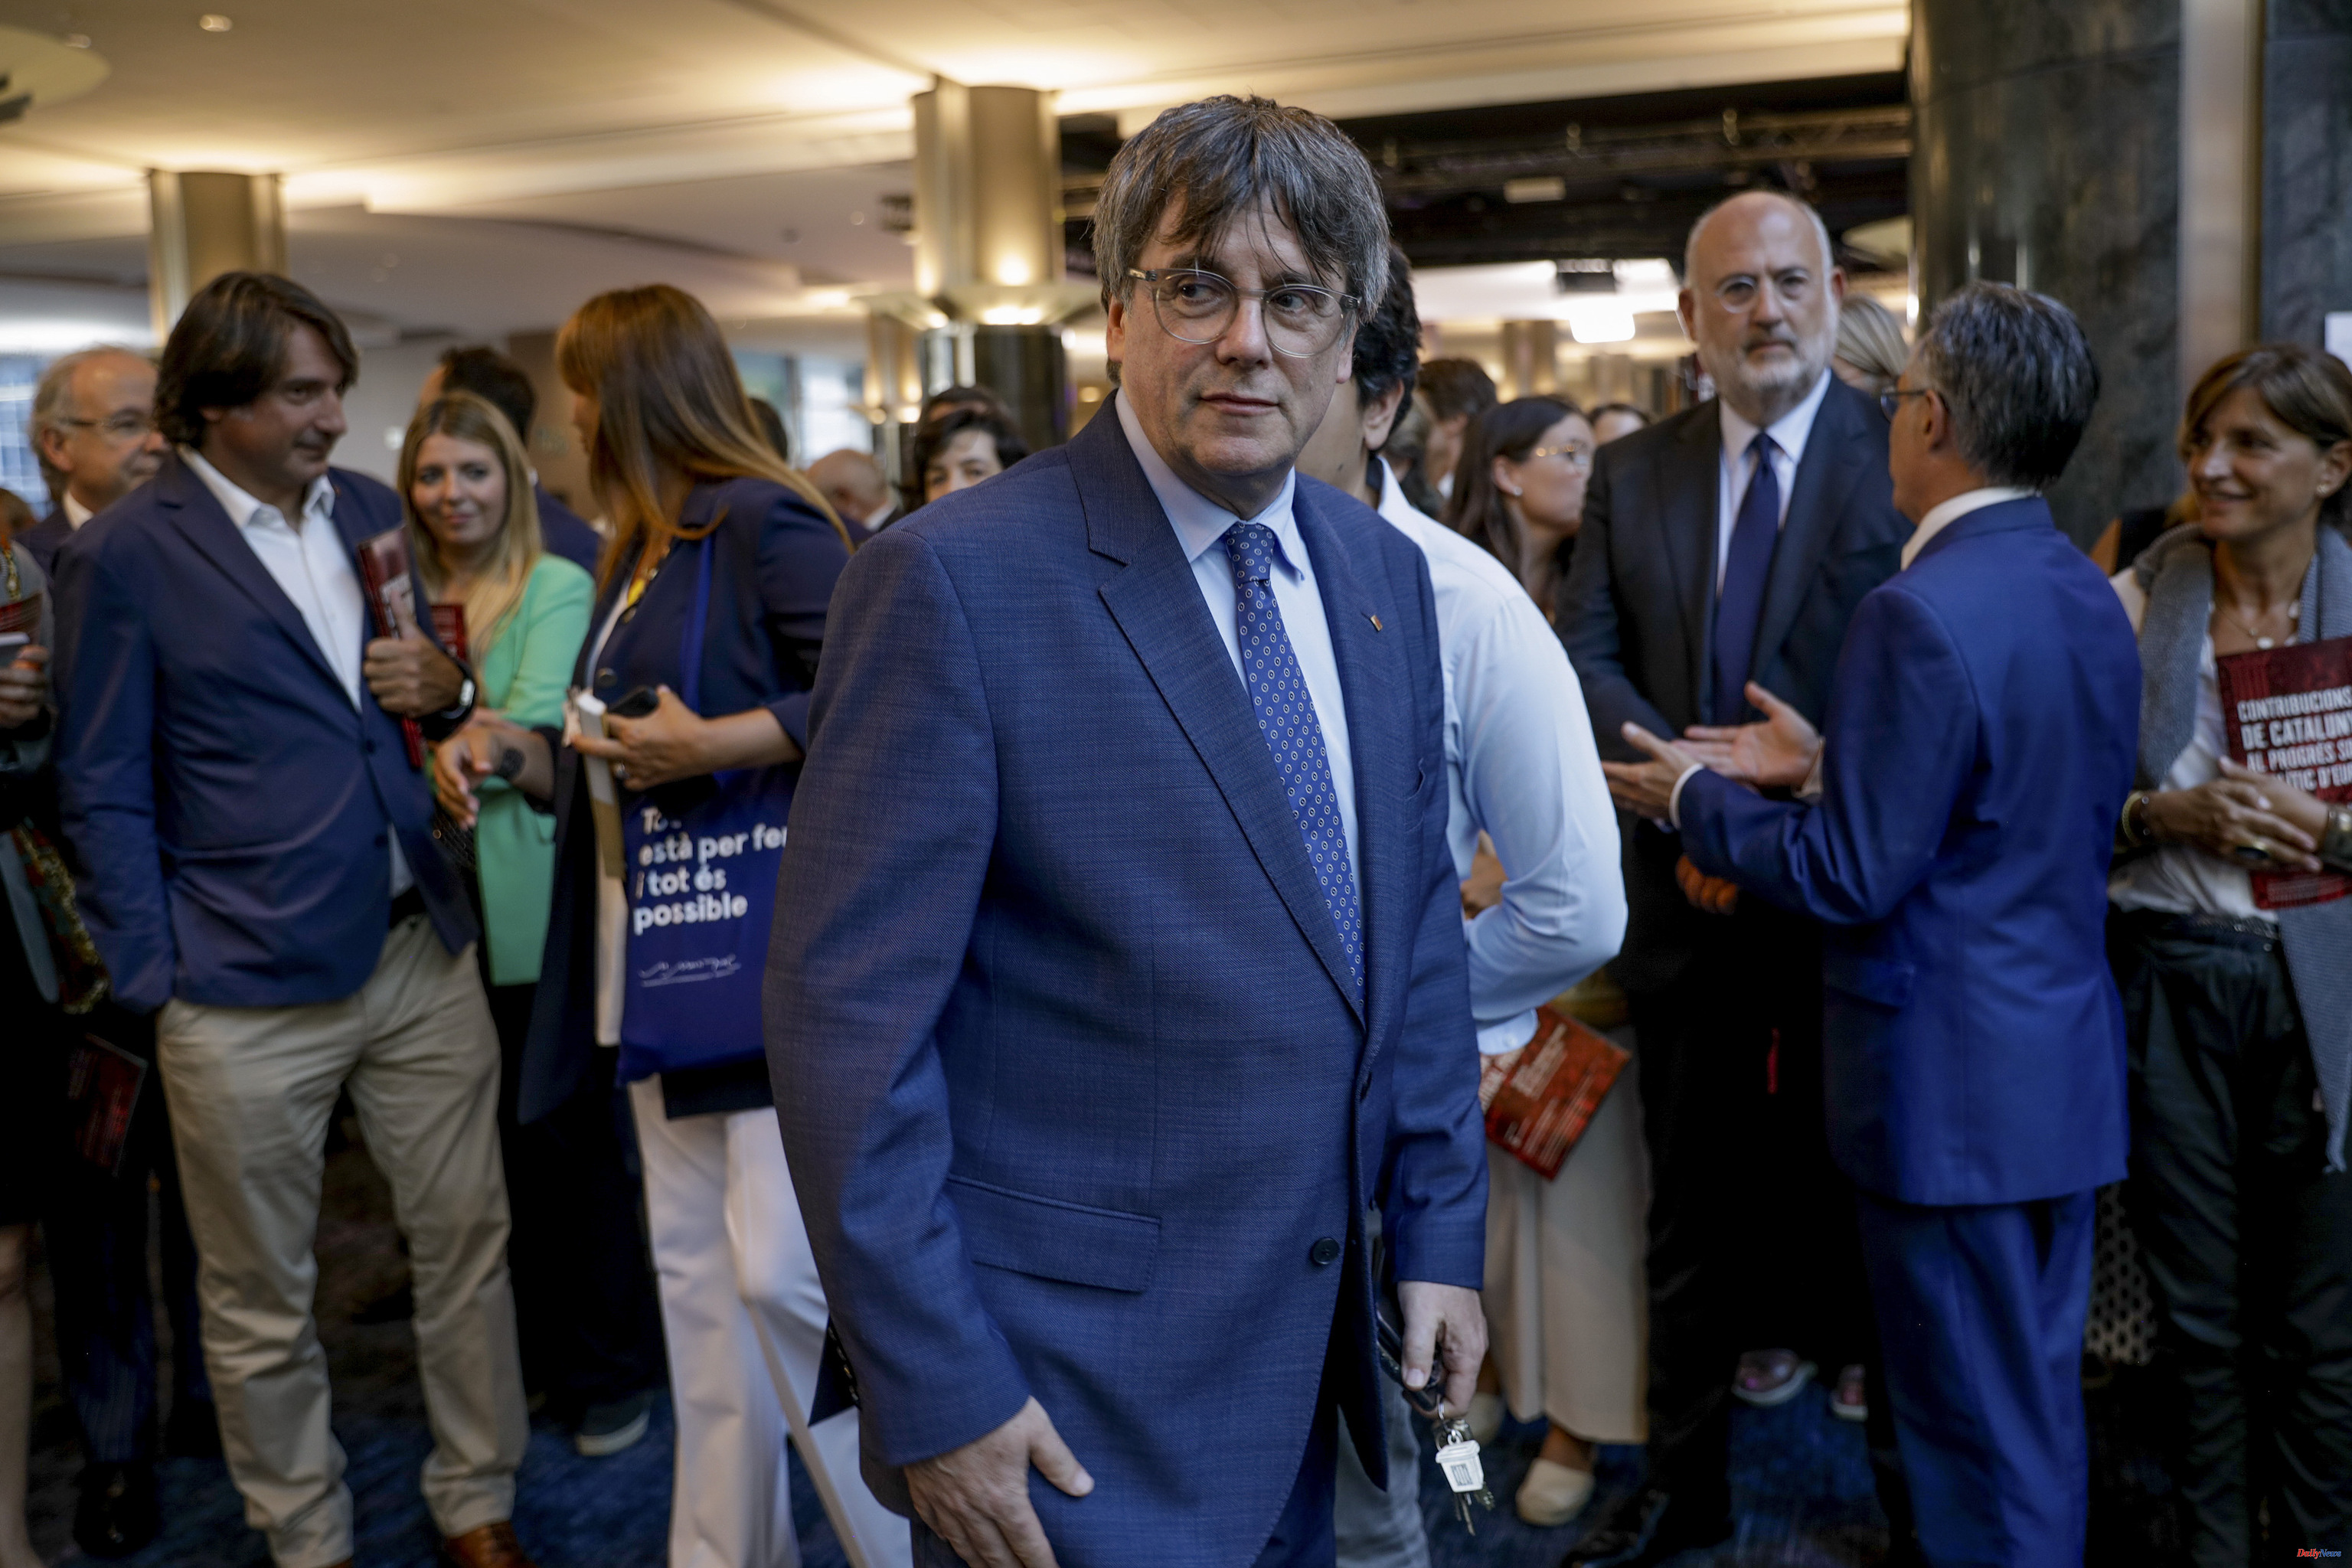 Spain Puigdemont once again challenges Judge Llarena and accuses him of "doing whatever is in his power to prevent" the amnesty